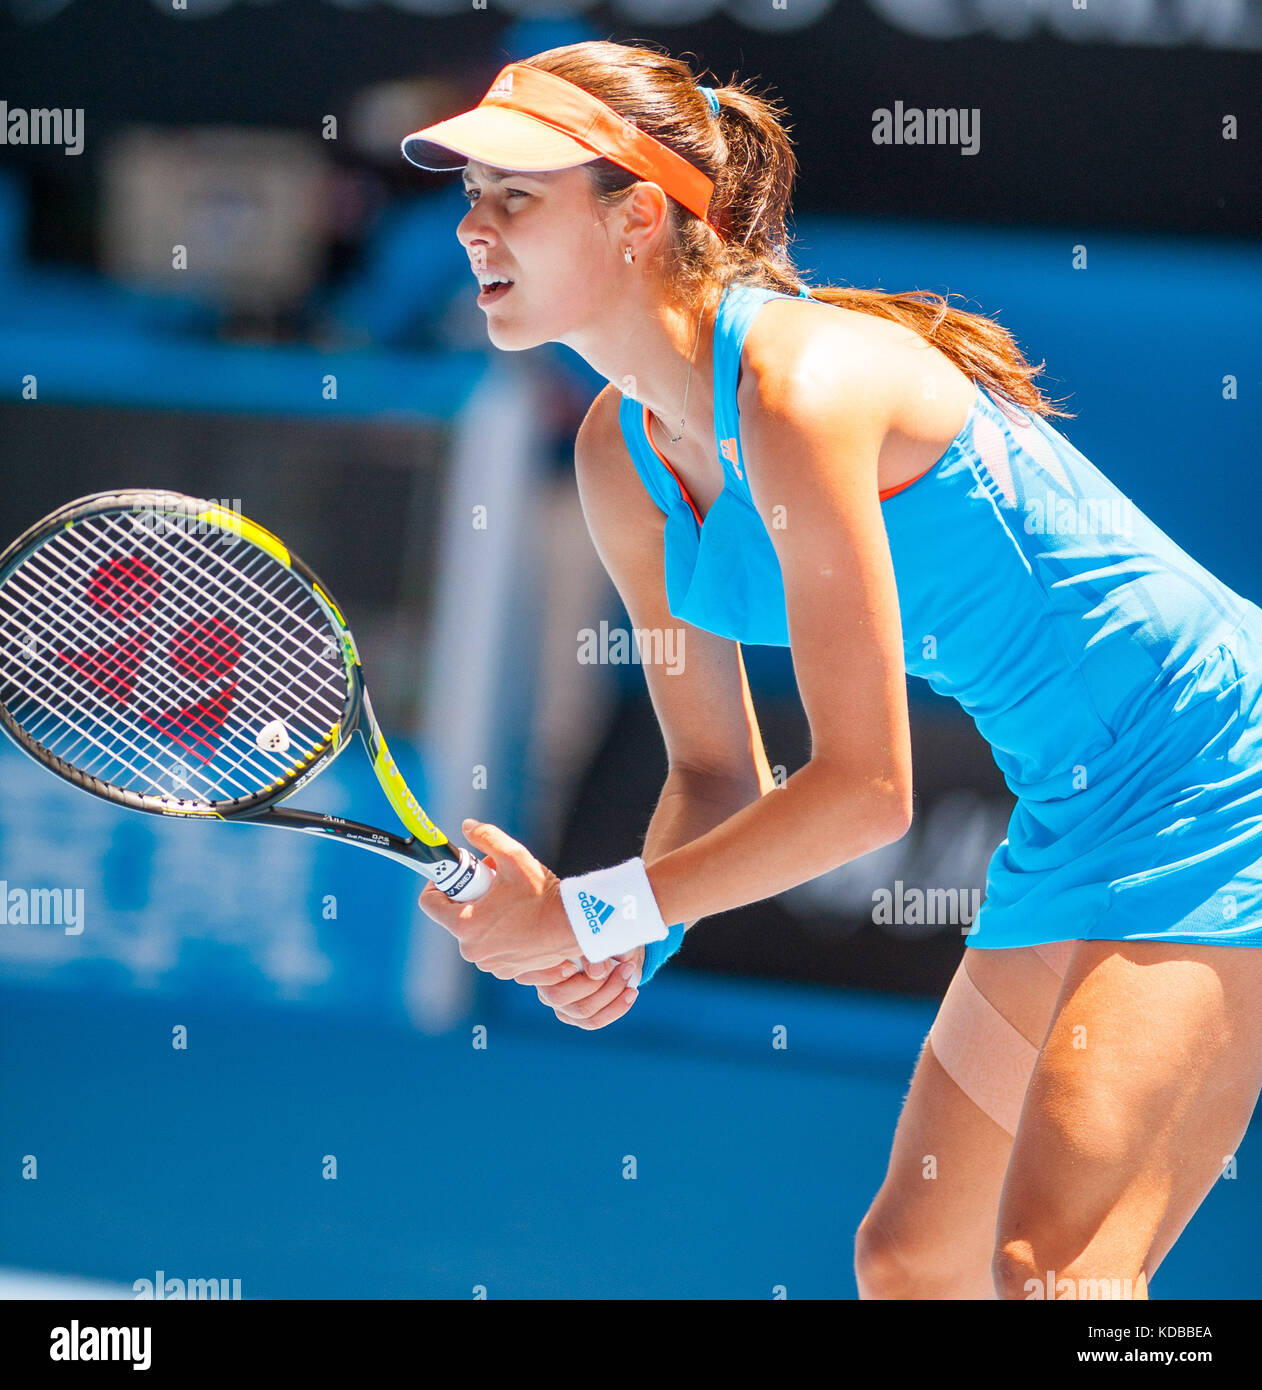 ANA IVANOVIC competes at the Australian Open. The Australian Open - a Grand Slam Tournament - is the opening event of the tennis calendar annually. Stock Photo